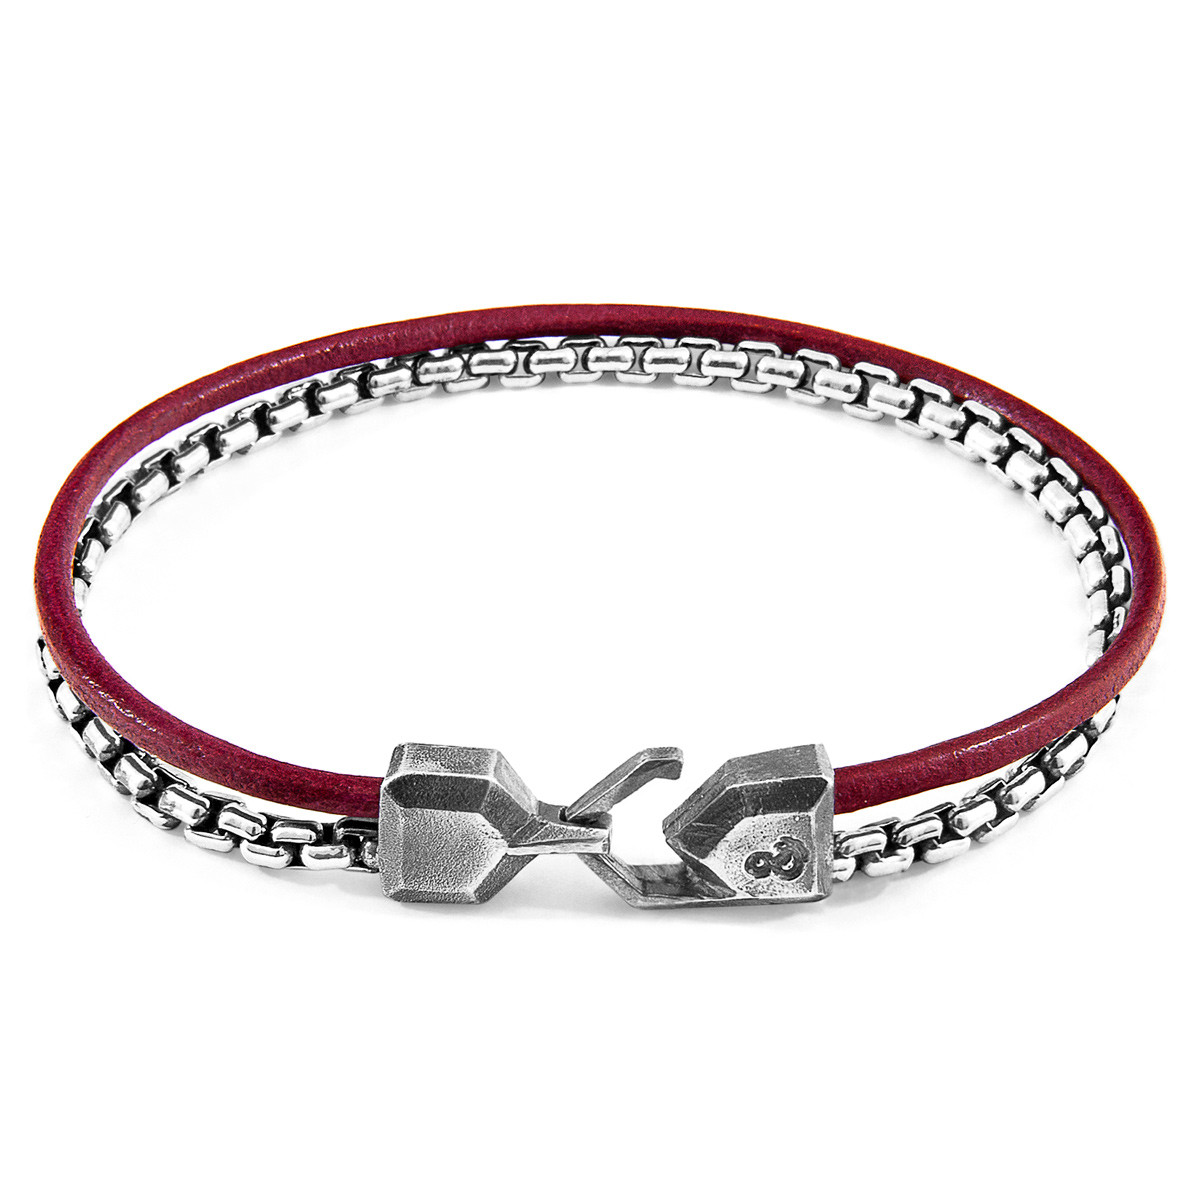 Anchor & Crew Bordeaux Red Moonraker Mast Silver and Round Leather Bracelet 